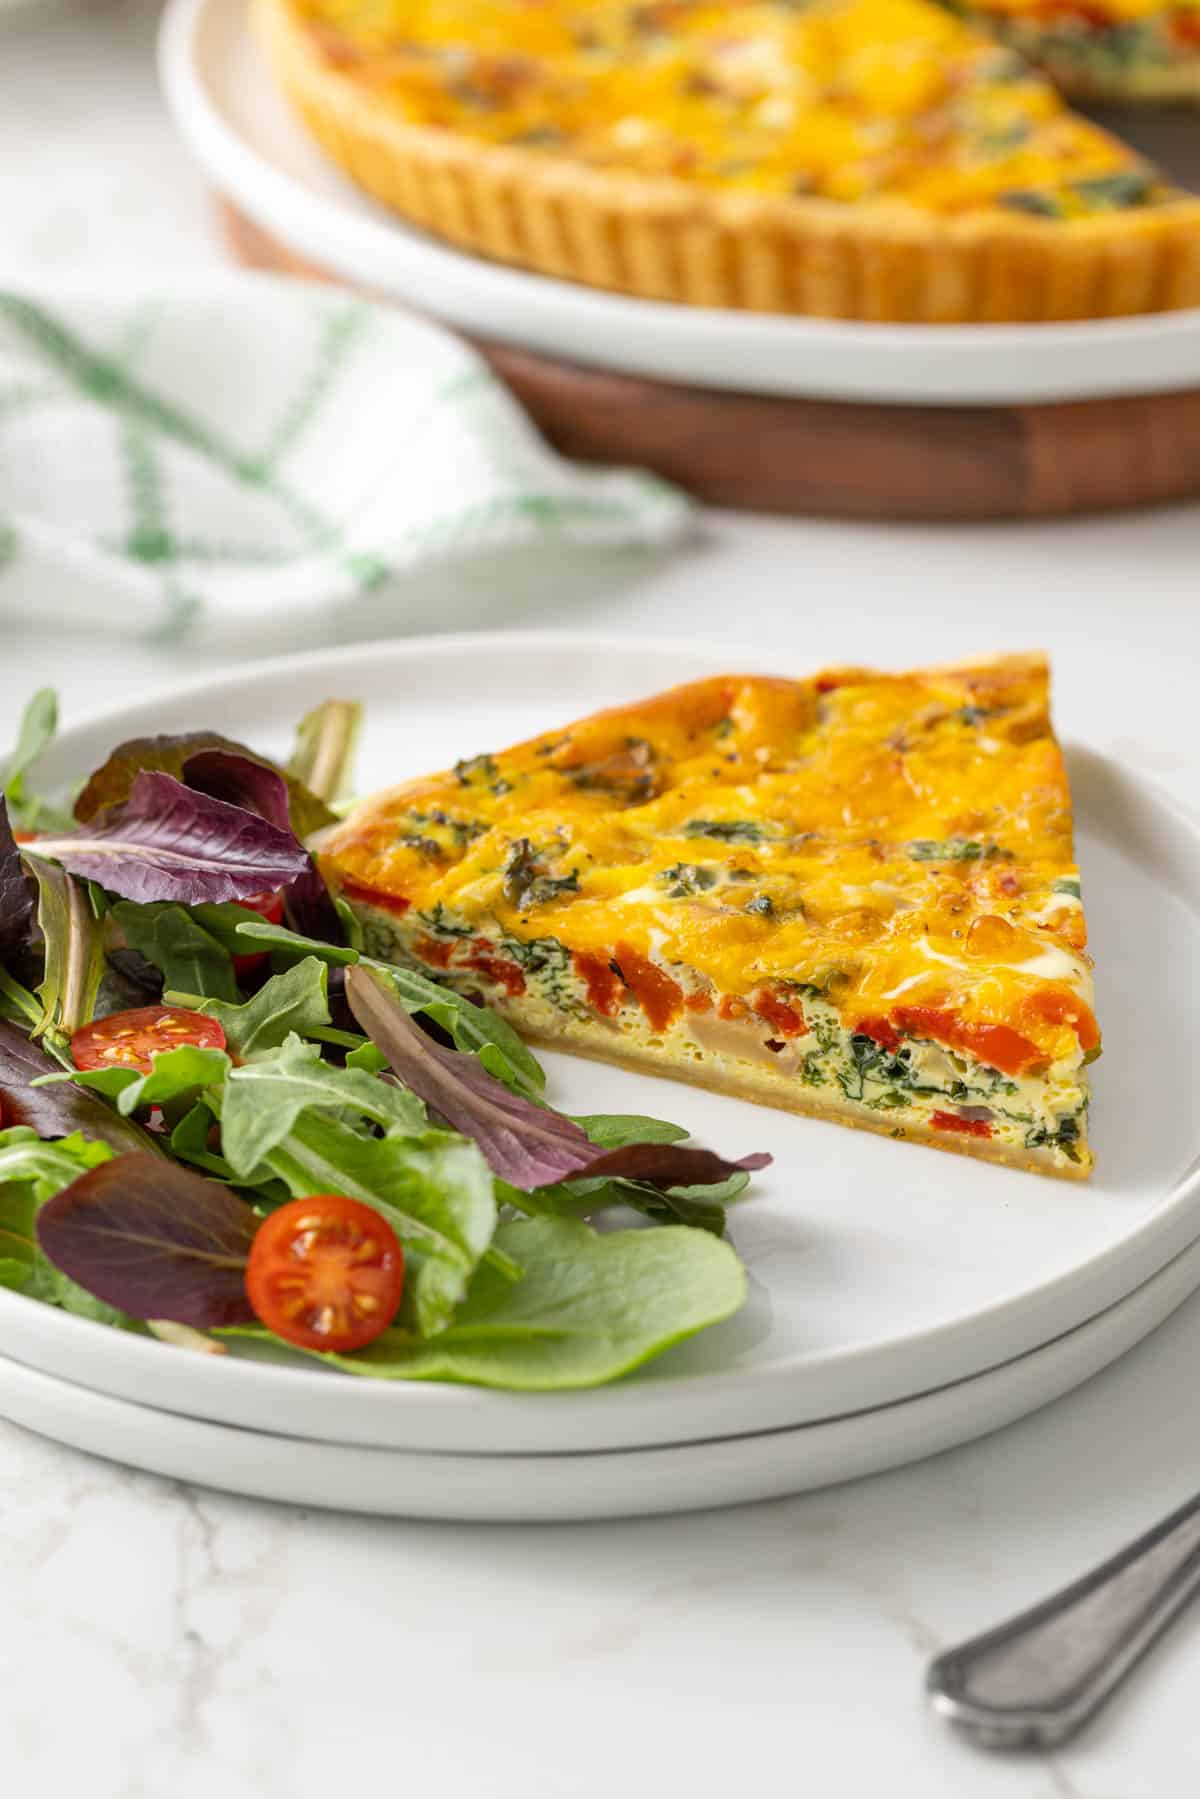 A slice of kale quiche on a white plate with a garden salad.